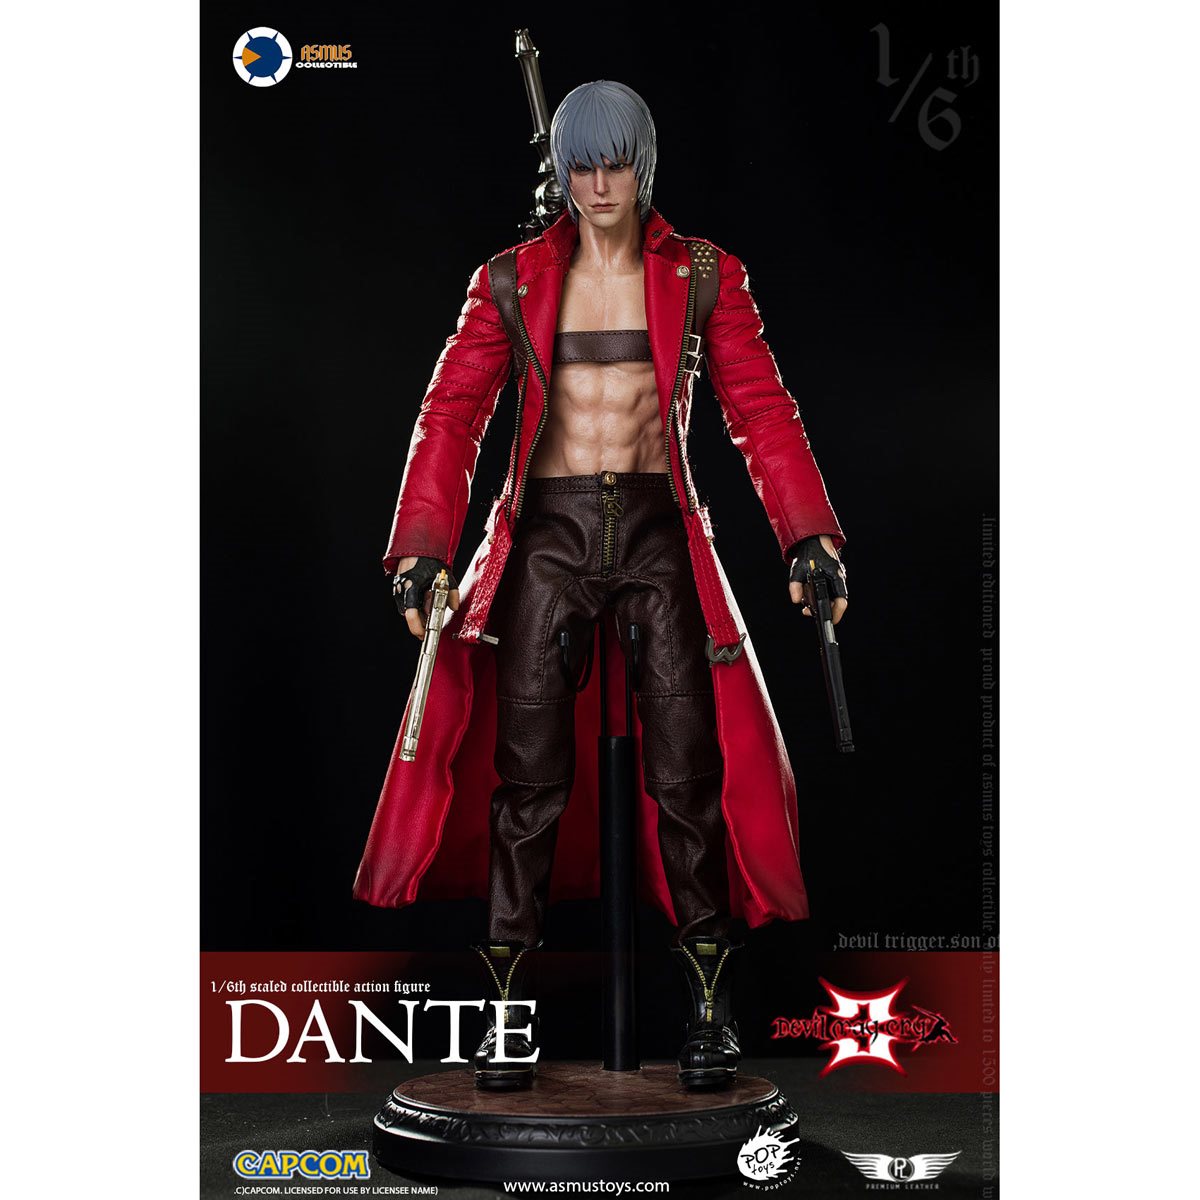 Devil May Cry Collectibles